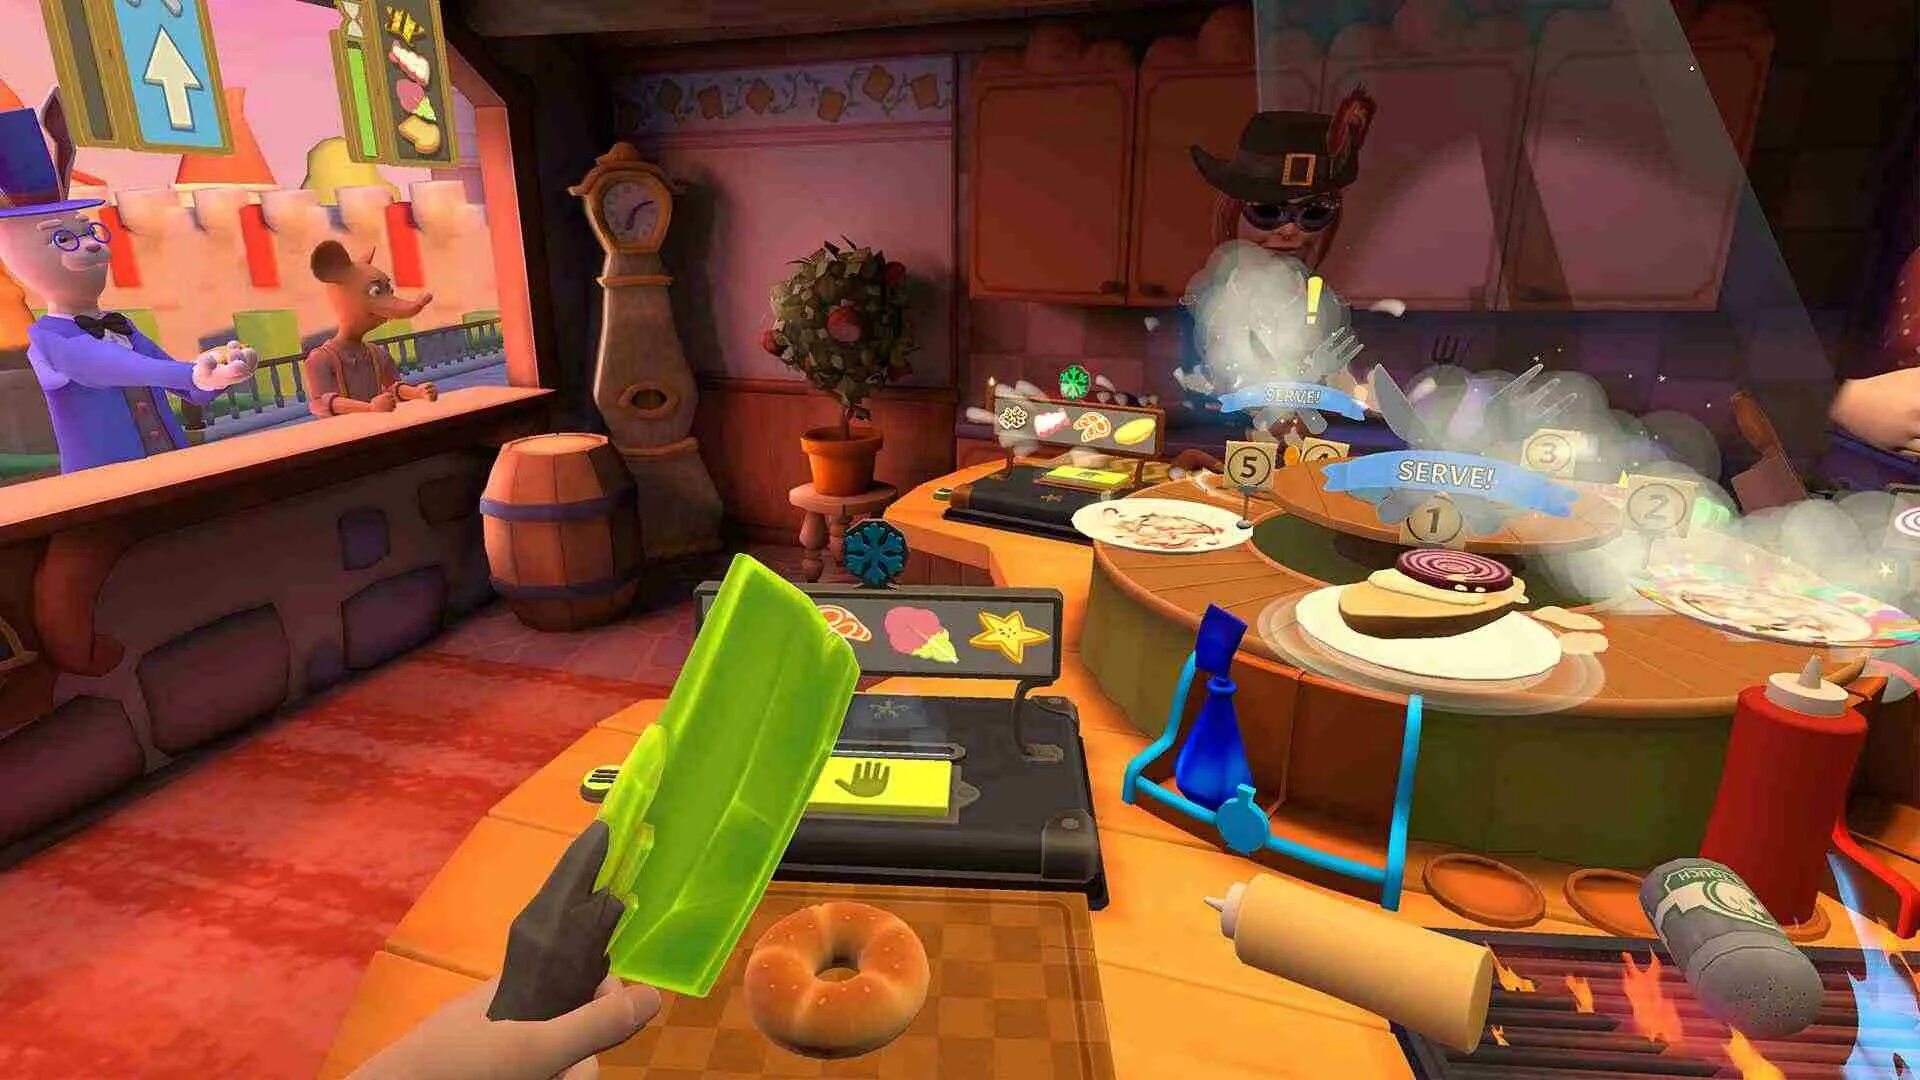 Vr out. Cook out игра. VR игры Quest 2. VR игры про готовку. Overcooked VR.